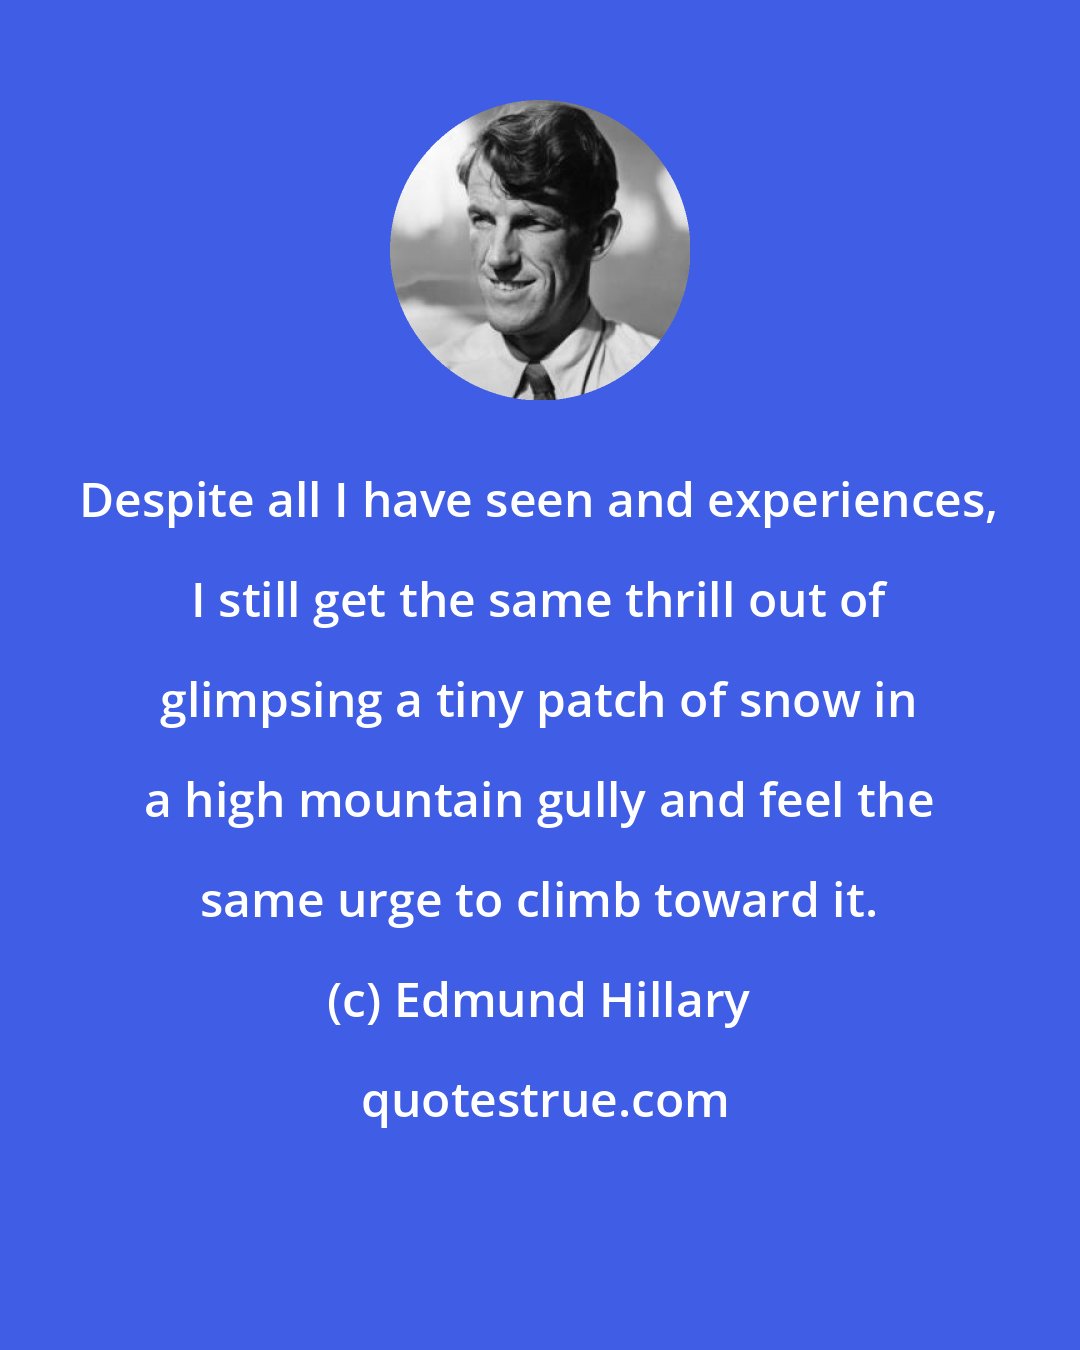 Edmund Hillary: Despite all I have seen and experiences, I still get the same thrill out of glimpsing a tiny patch of snow in a high mountain gully and feel the same urge to climb toward it.